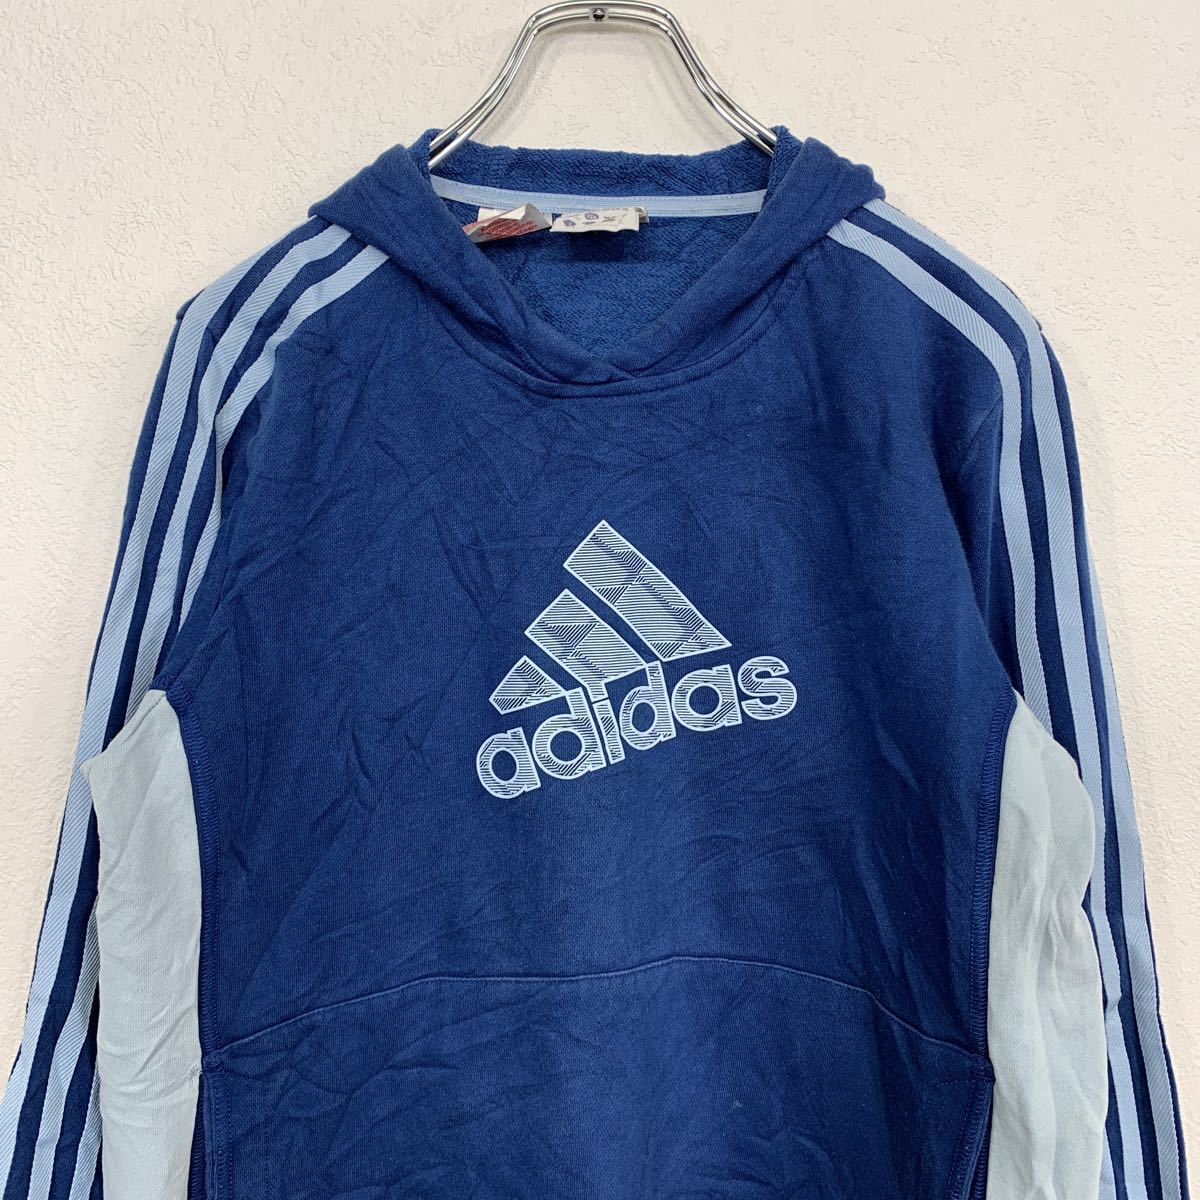 adidas sweat Parker Kids 160 blue Adidas sport Logo old clothes . America buying up t2111-4760